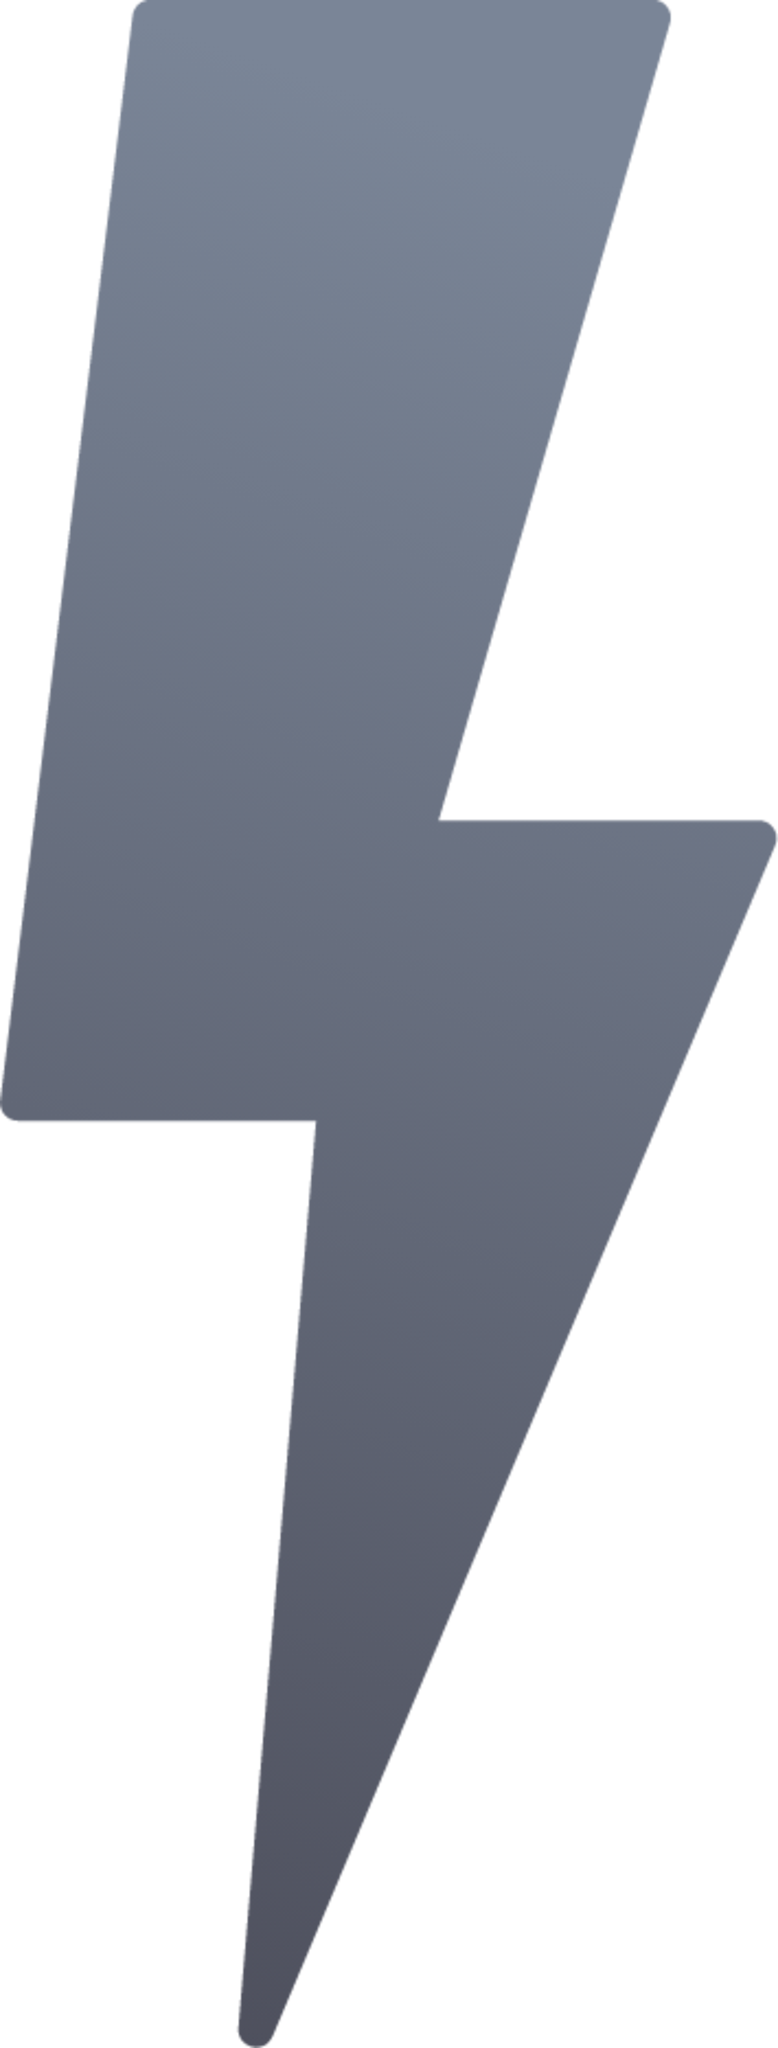 wide area network connection icon